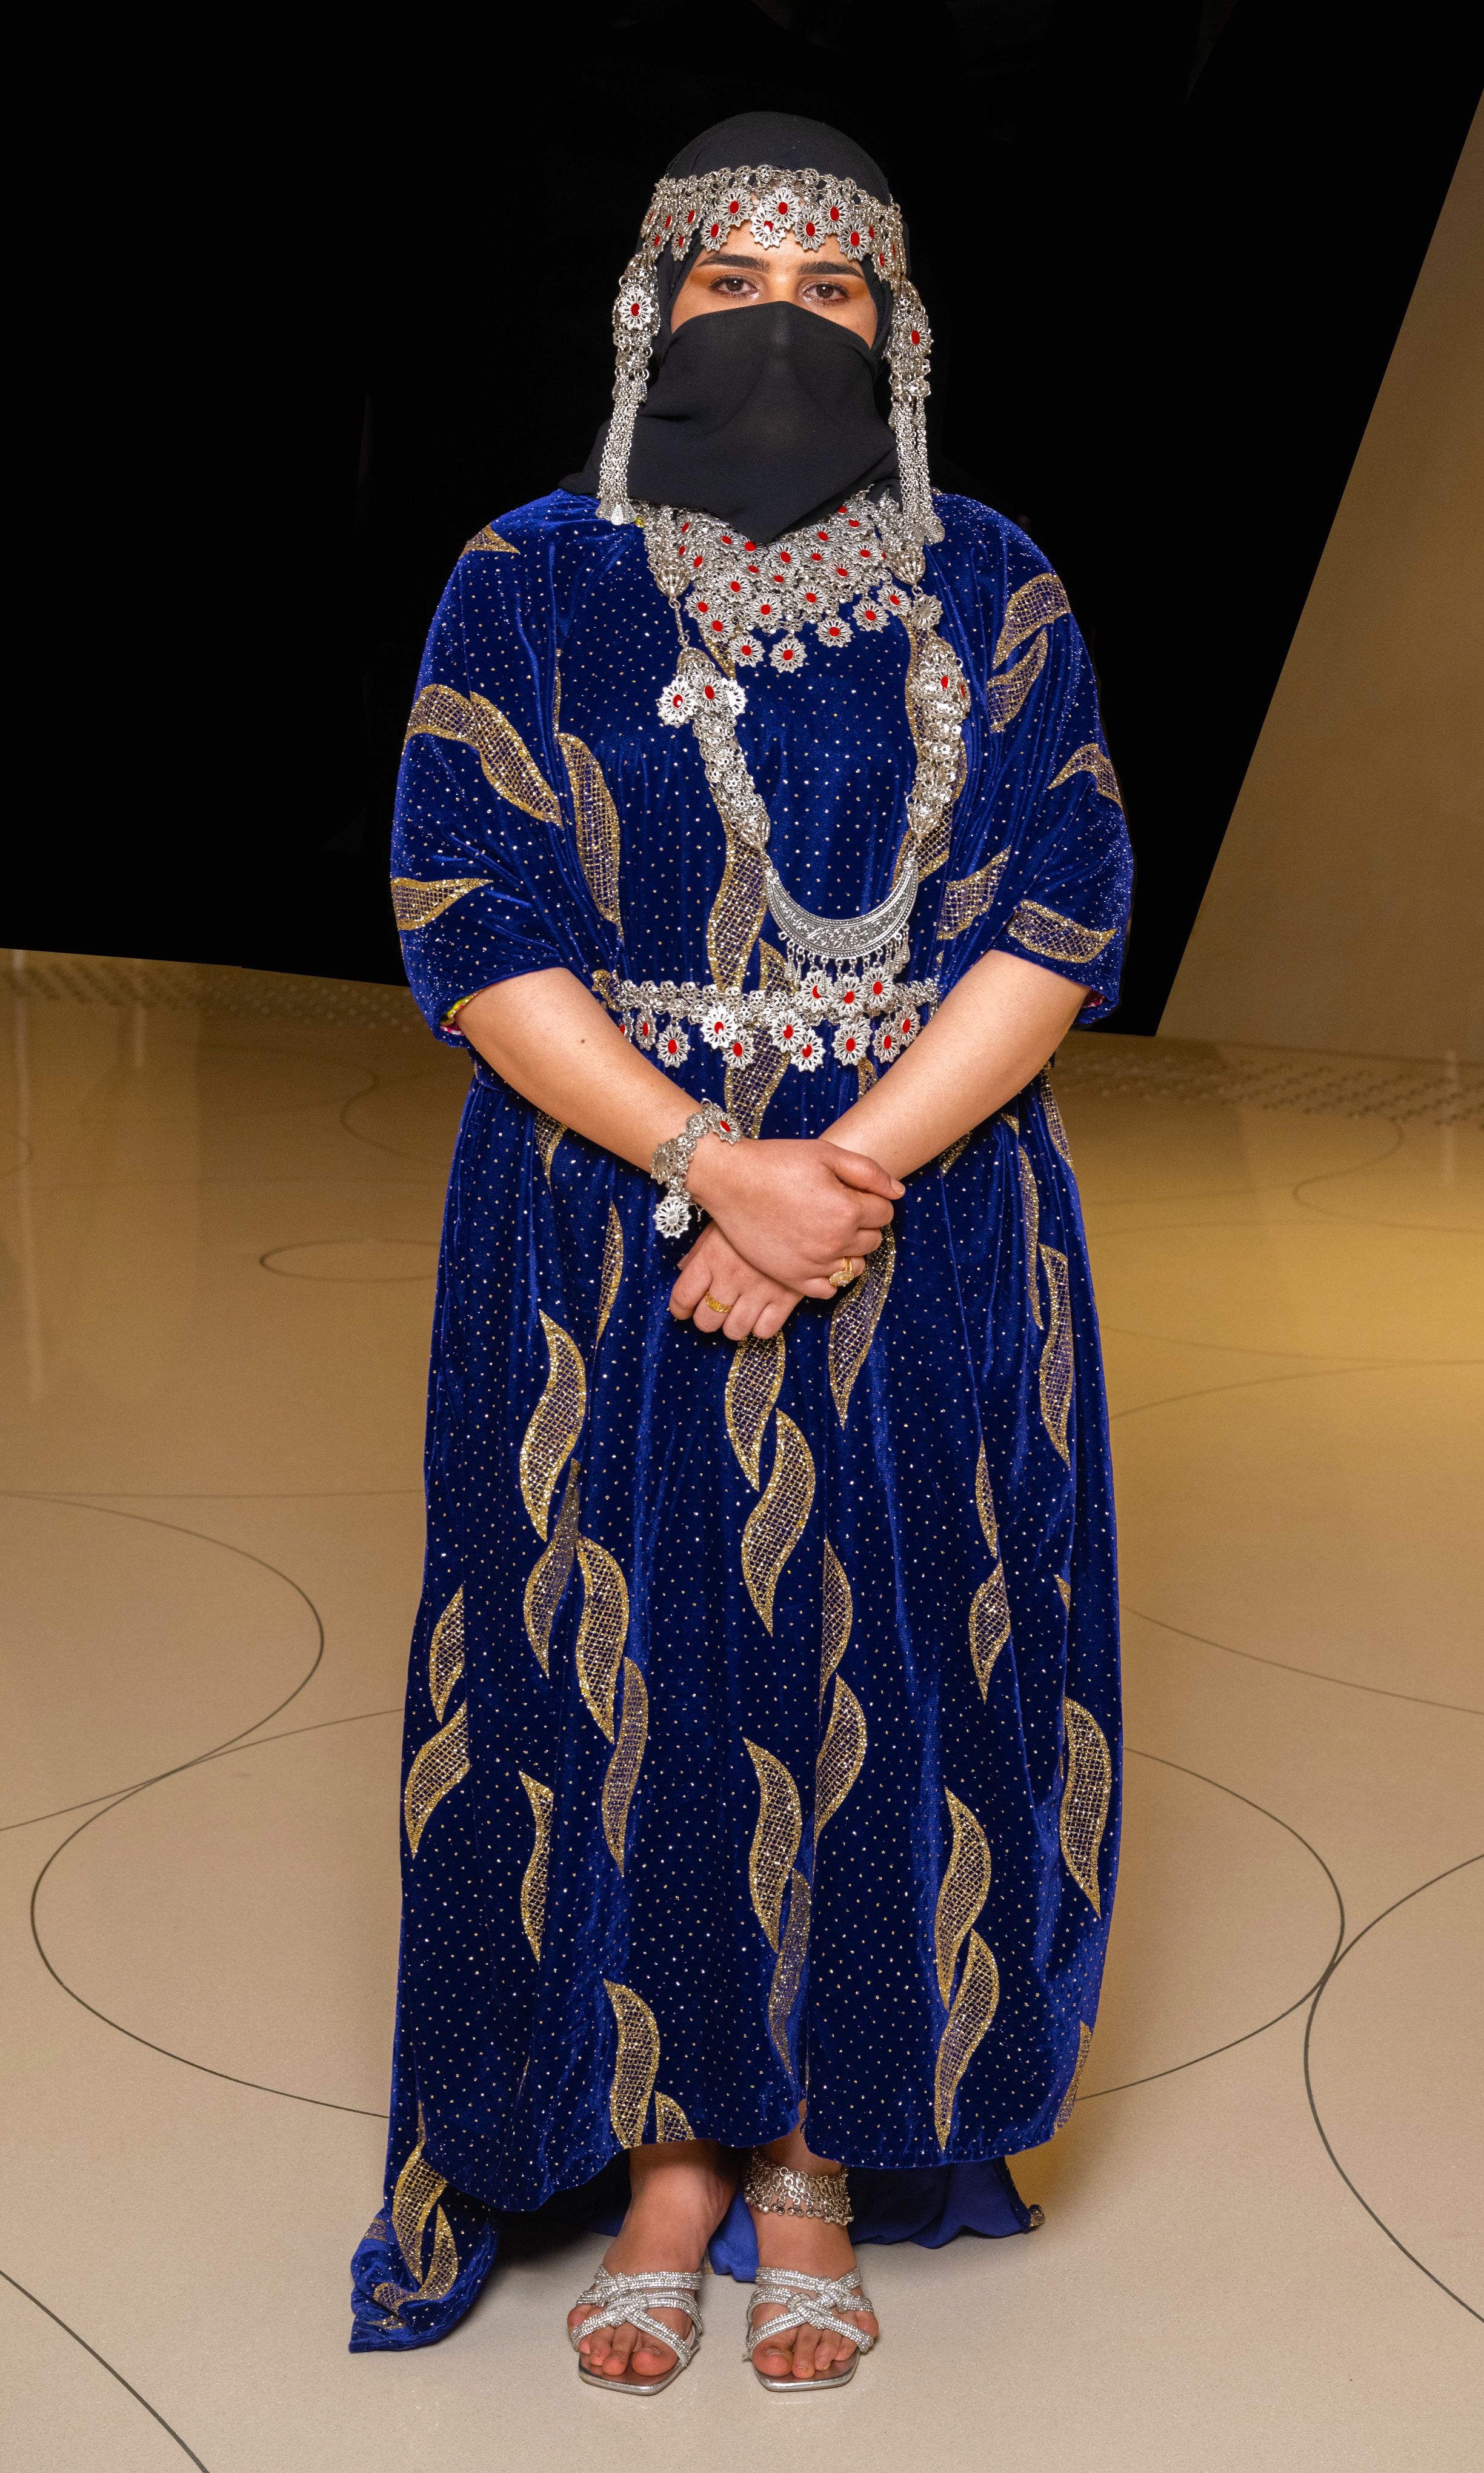 Woman wears a blue dress embroidered with silver threads, silver anklet, necklace and face veil during a Yemeni fashion show.